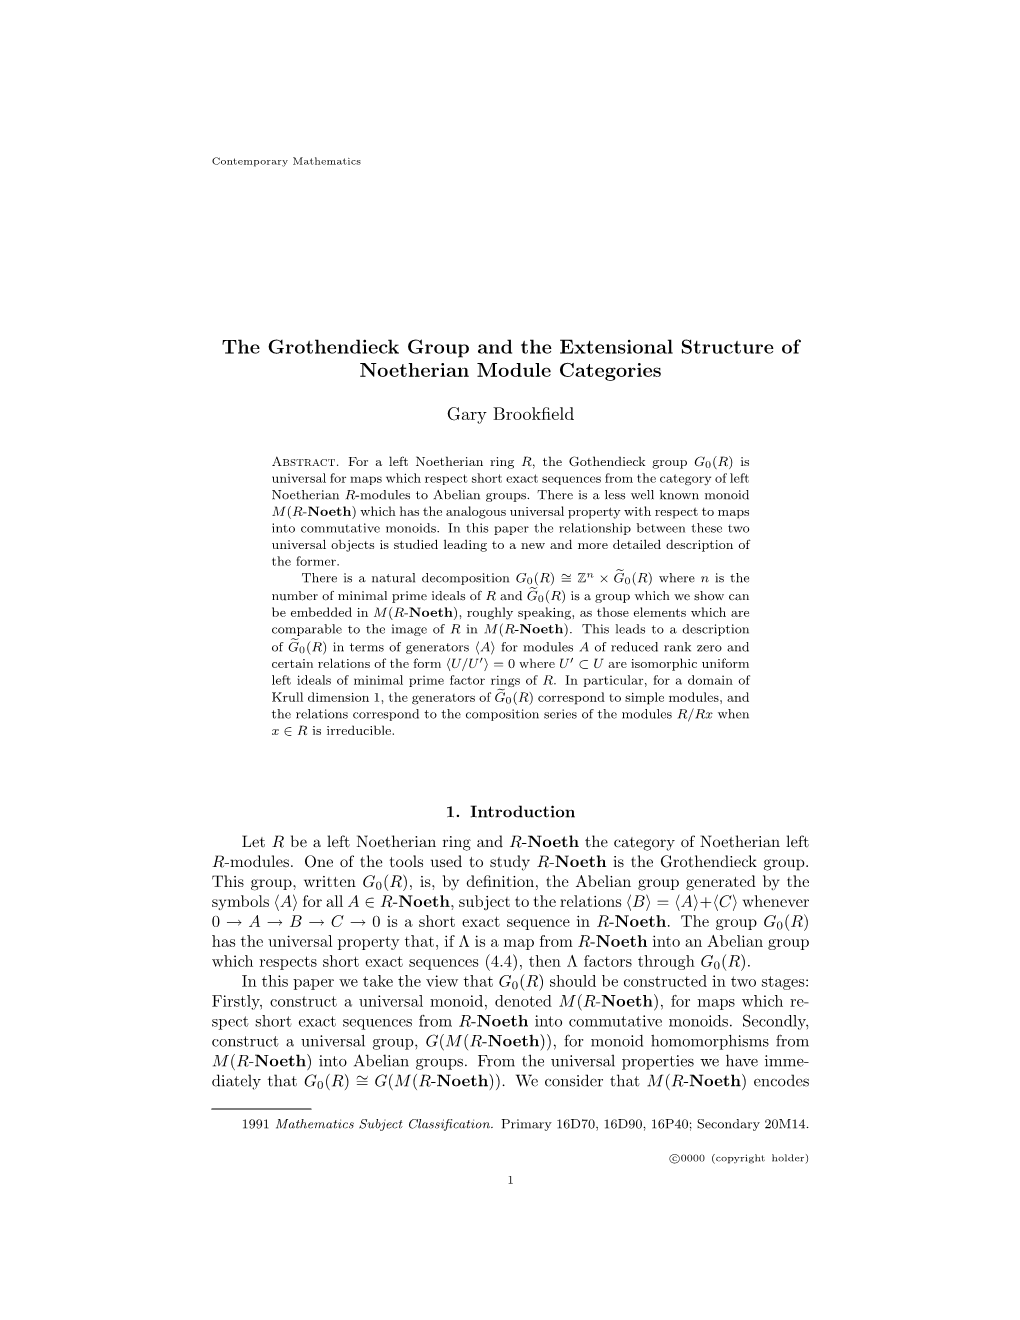 The Grothendieck Group and the Extensional Structure of Noetherian Module Categories